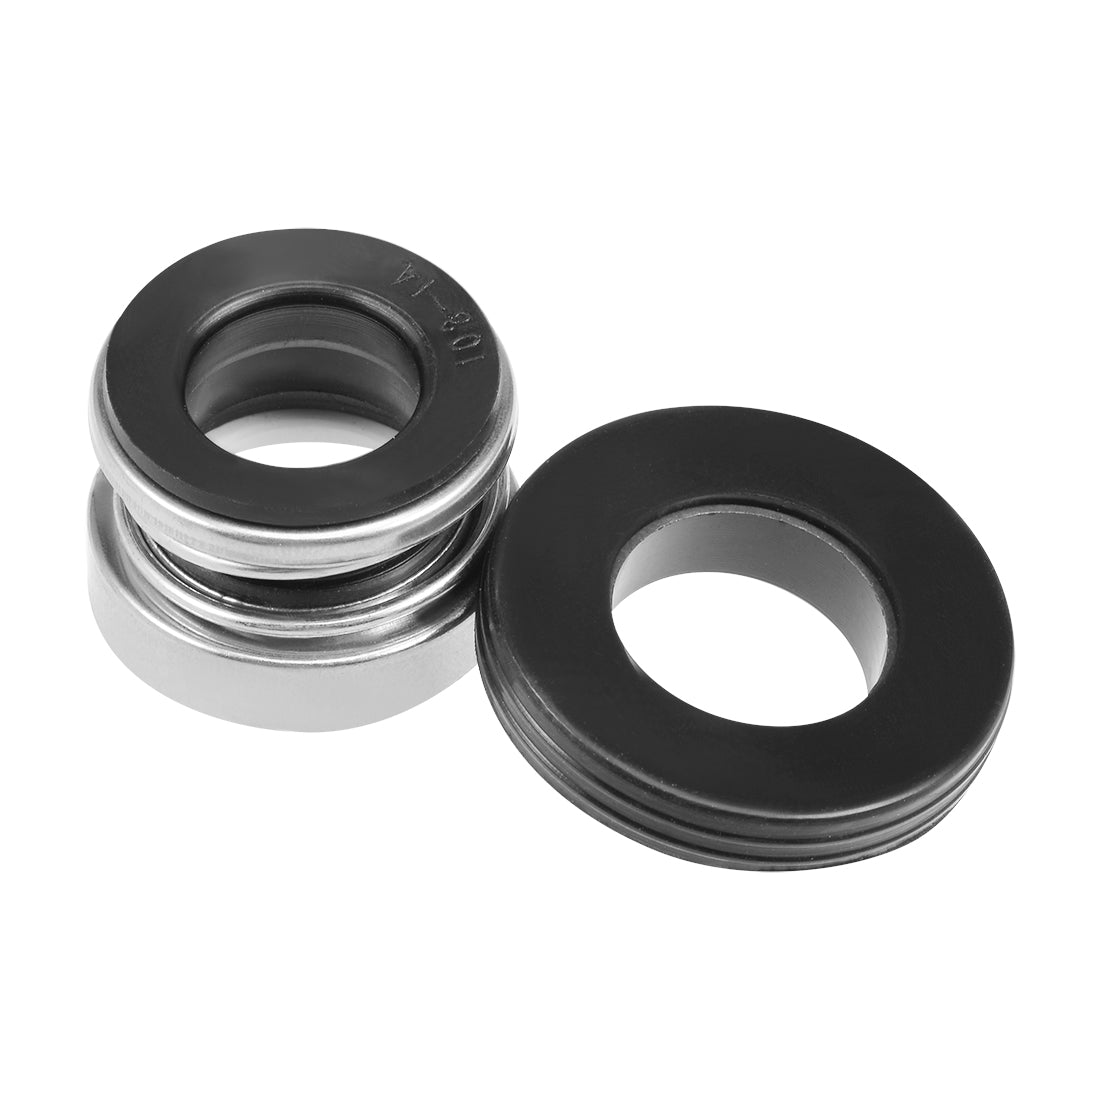 uxcell Uxcell Mechanical Shaft Seal Replacement for Pool Spa Pump 2pcs 103-14